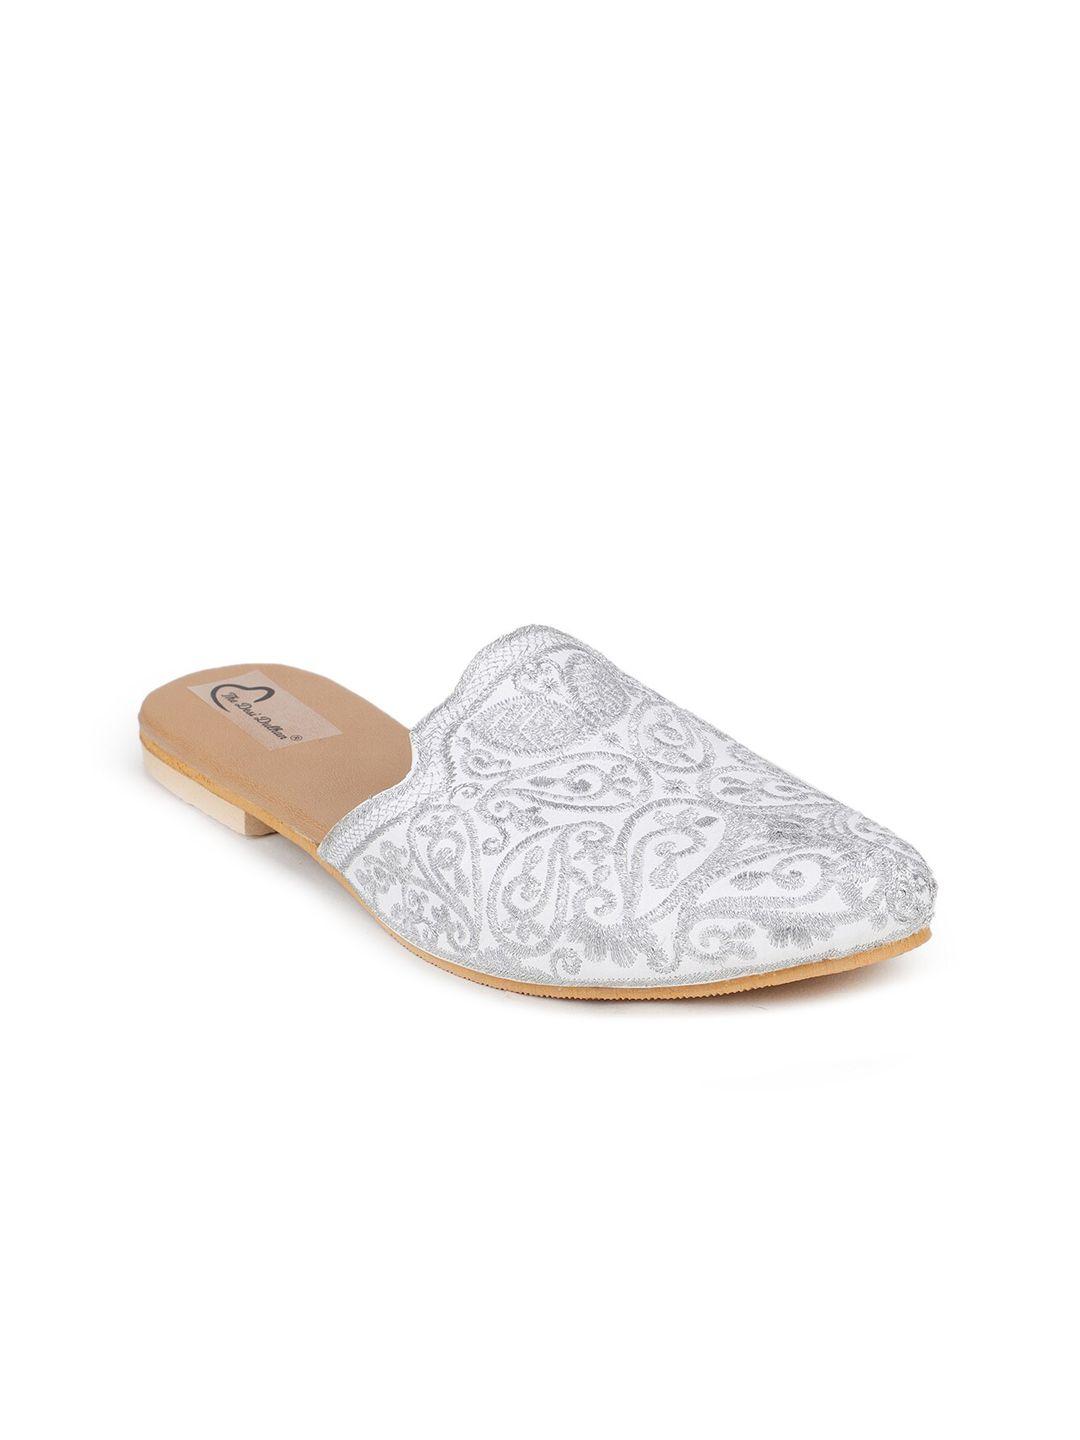 the desi dulhan women silver-toned embellished ethnic mules flats